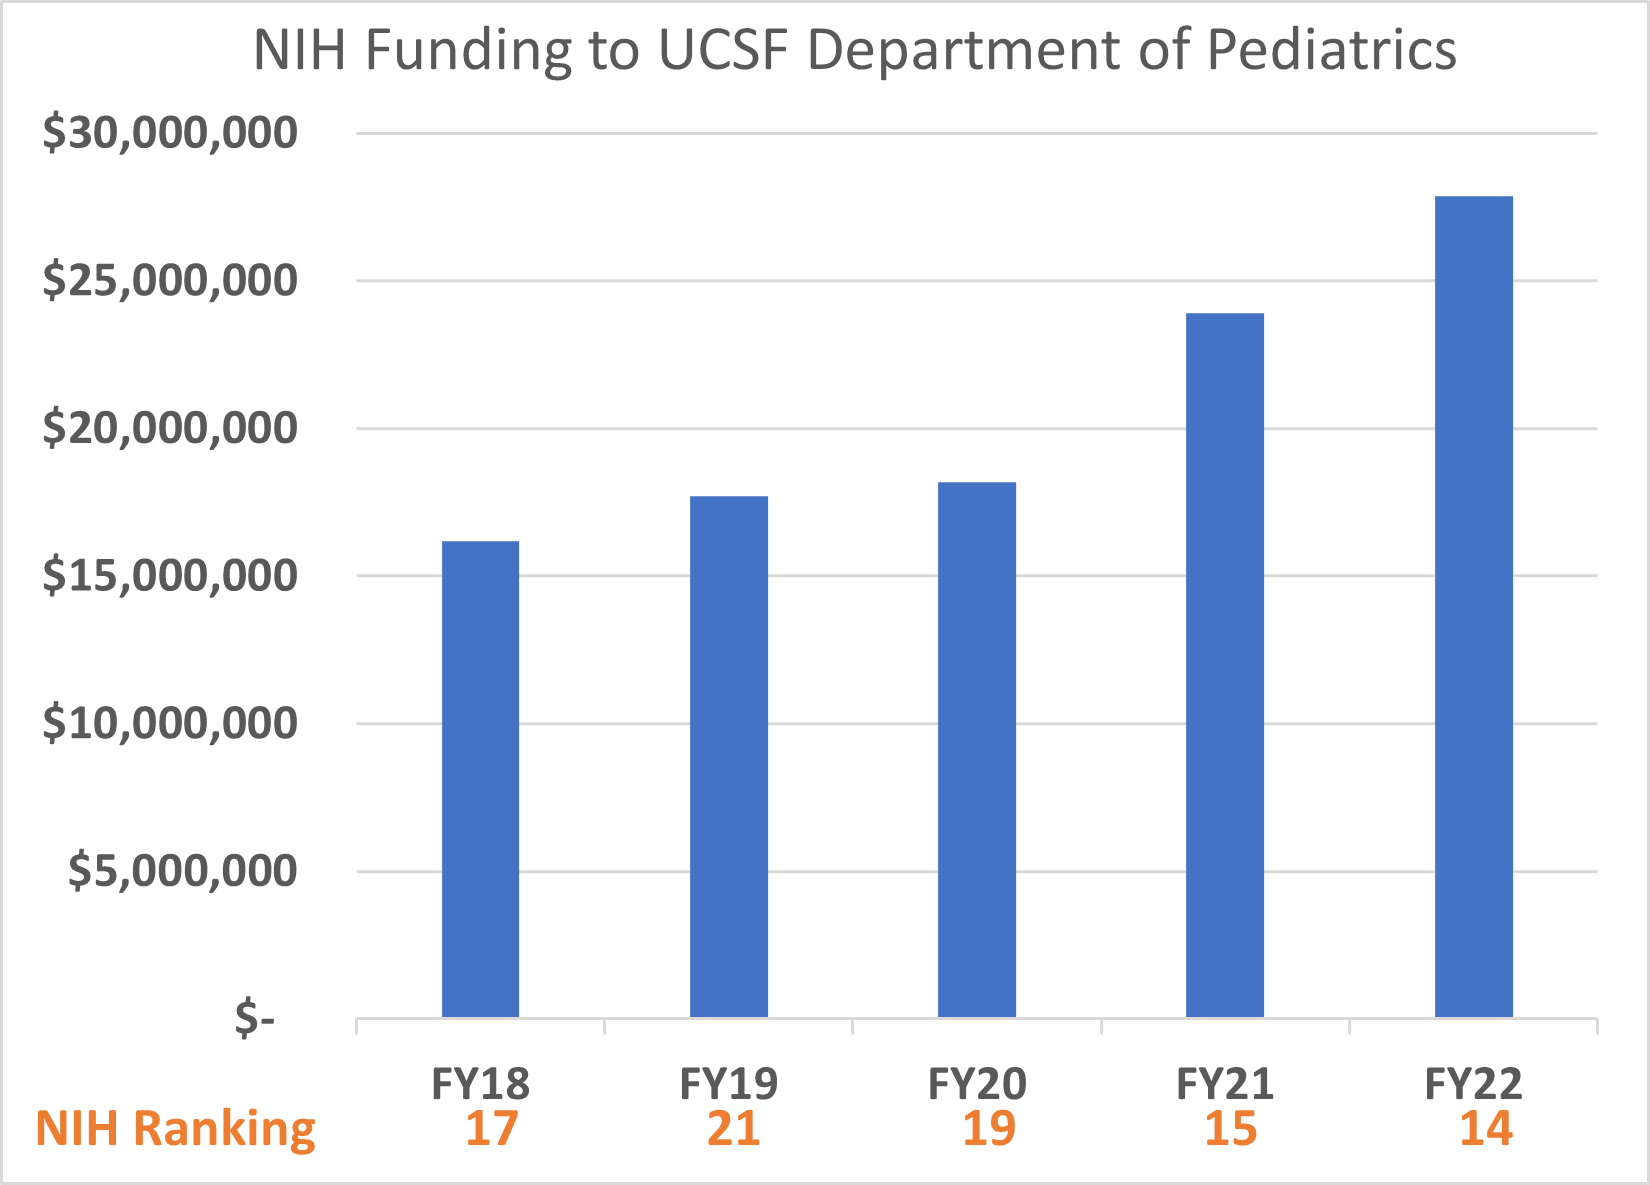 Graph showing year-over-year improvement in NIH funding to the UCSF Department of Pediatrics